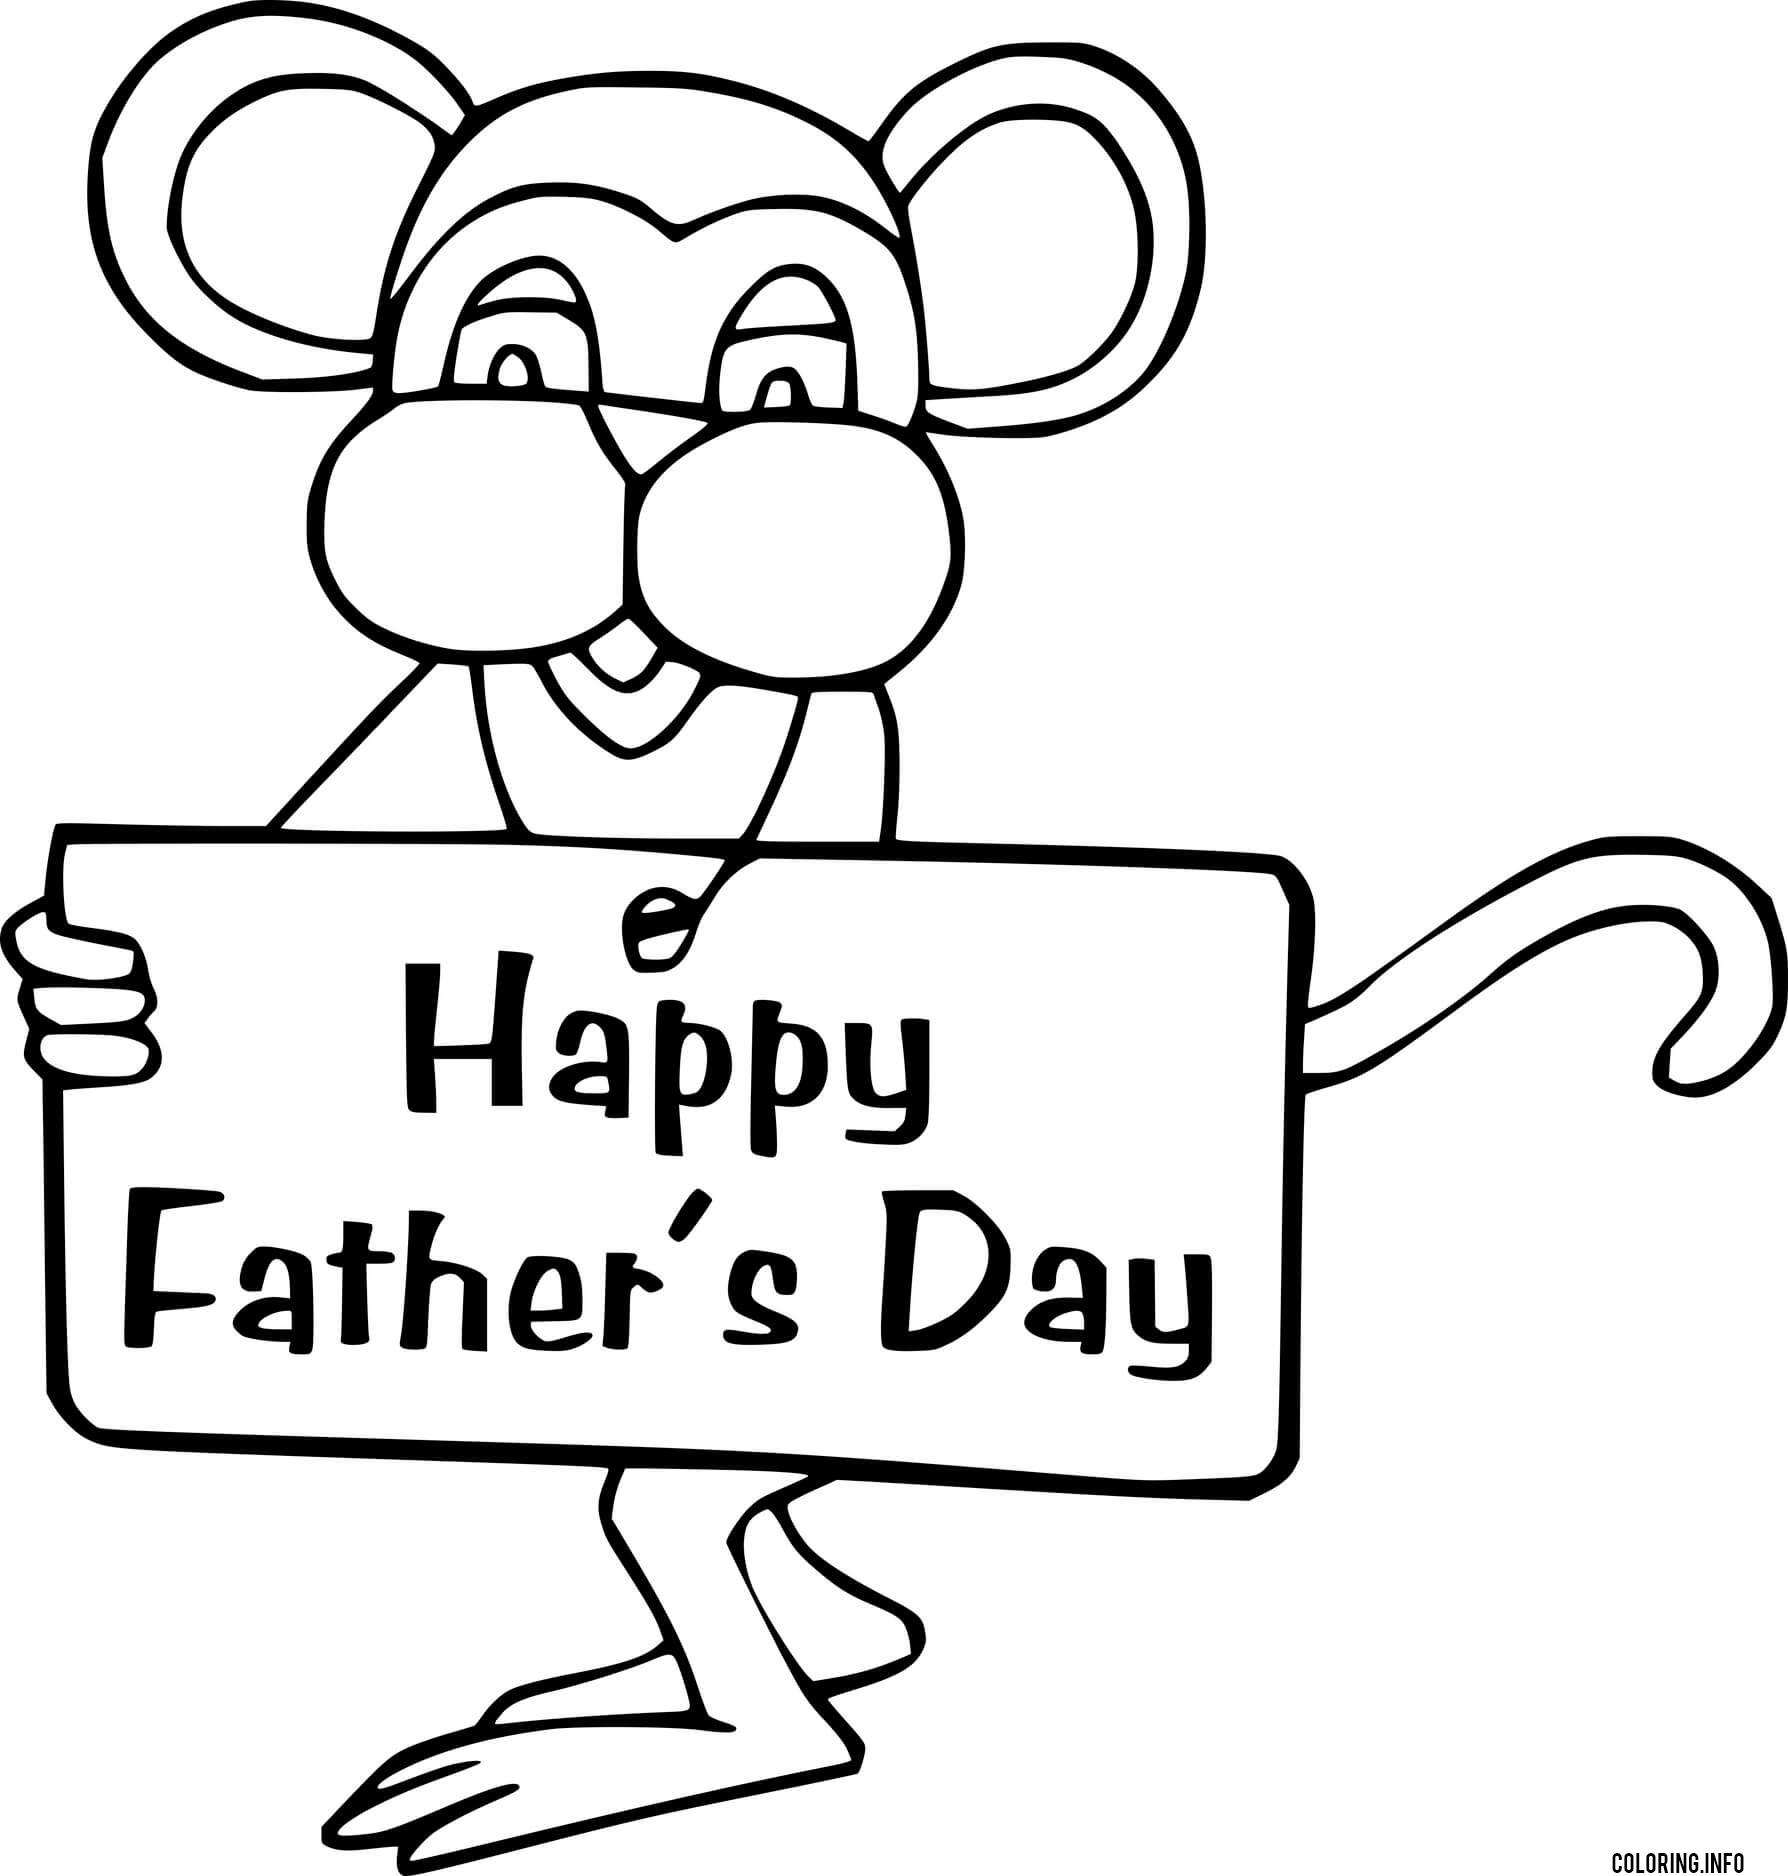 Monkey Wishes Happy Fathers Day coloring